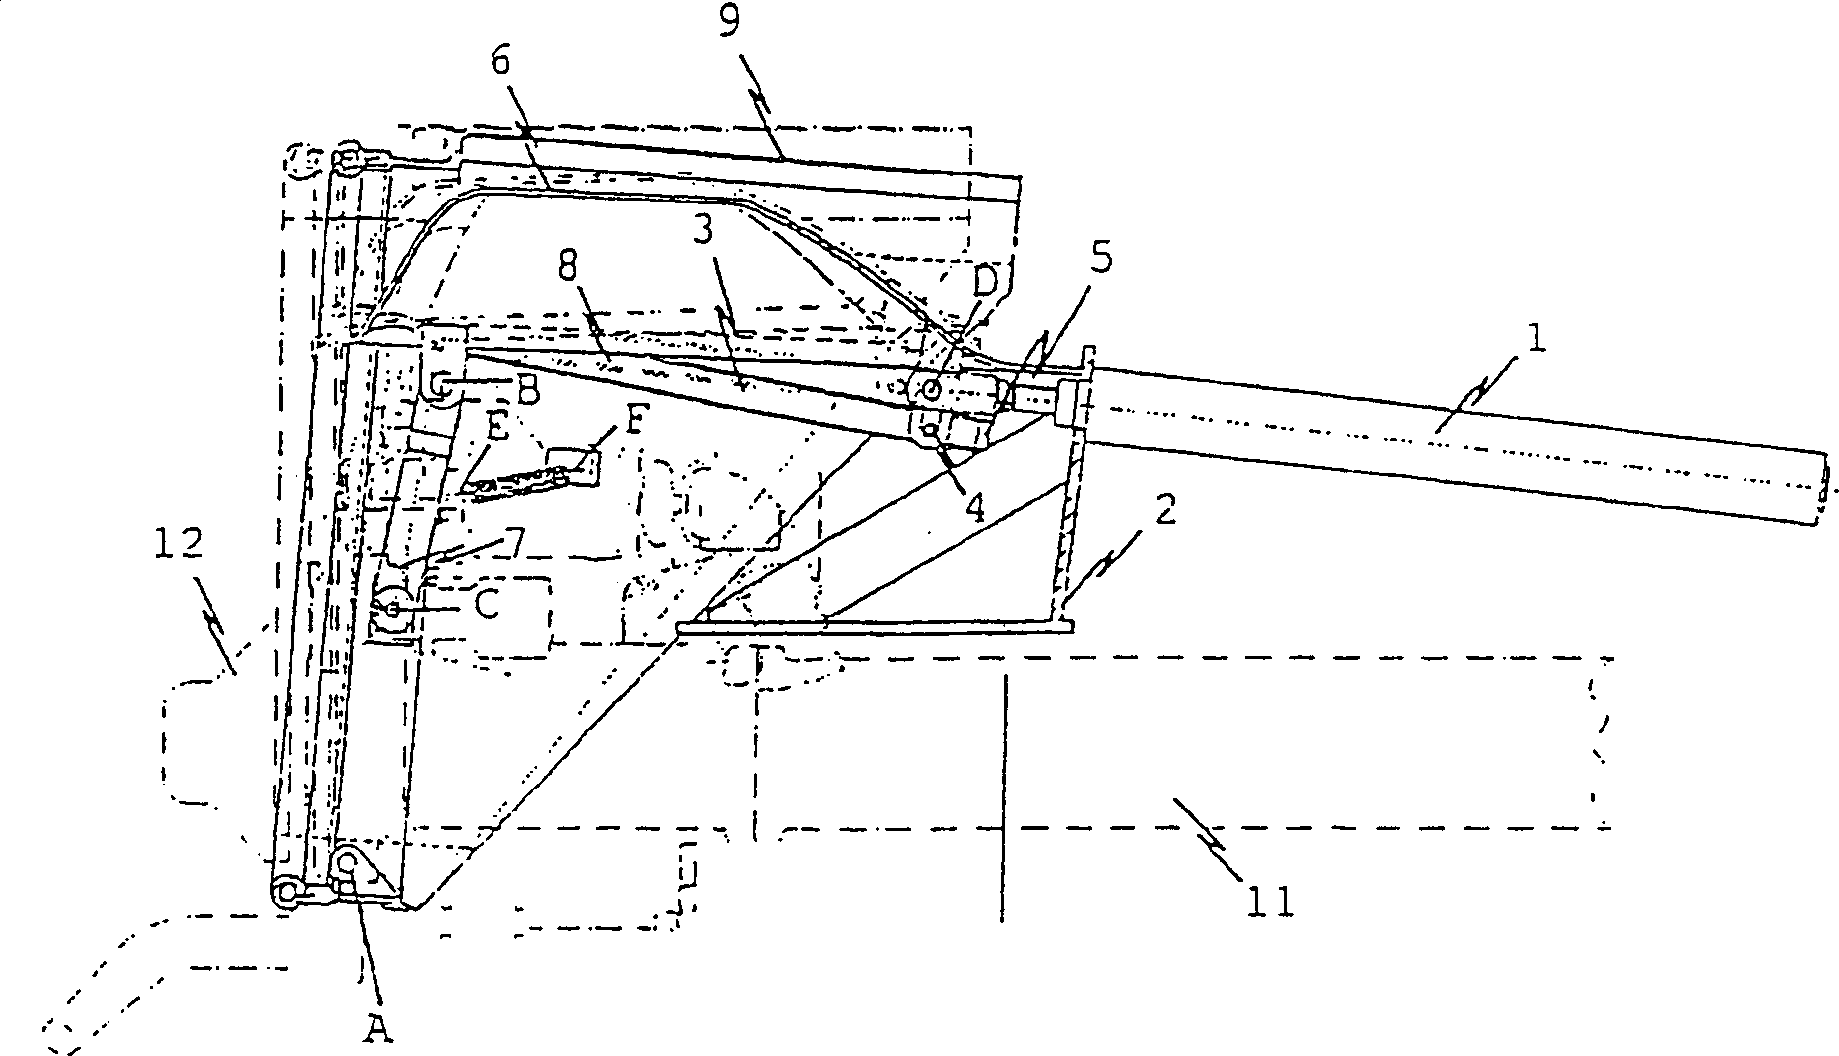 Car couple with cover and method for returning car coupler coupling head